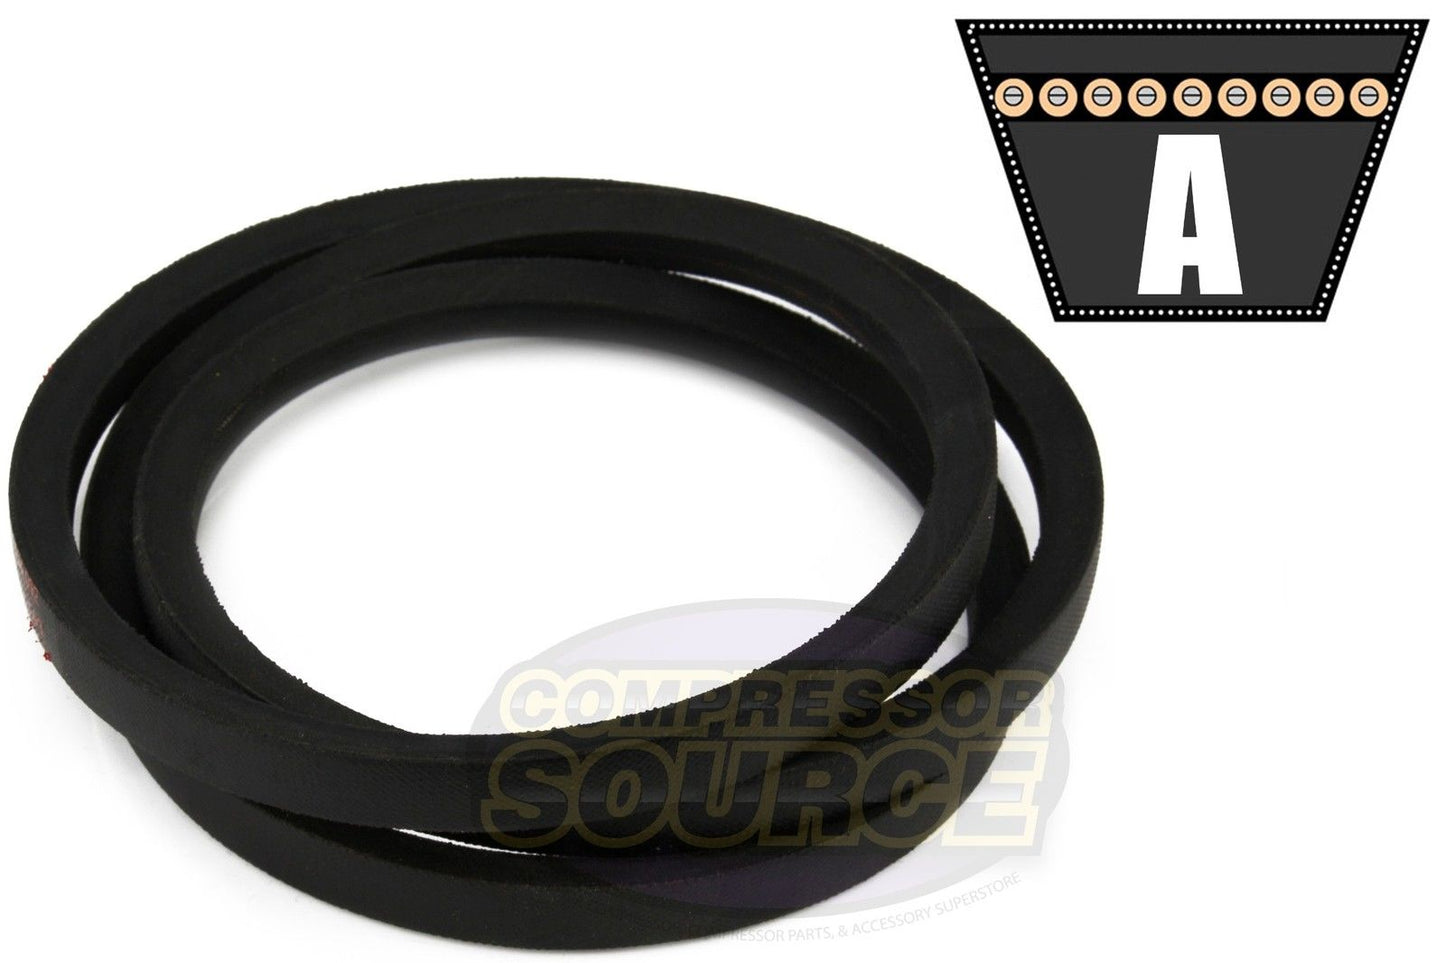 A48 1/2" x 50" V Belt 4L500 Replacement High Quality Industrial & Lawn Mower